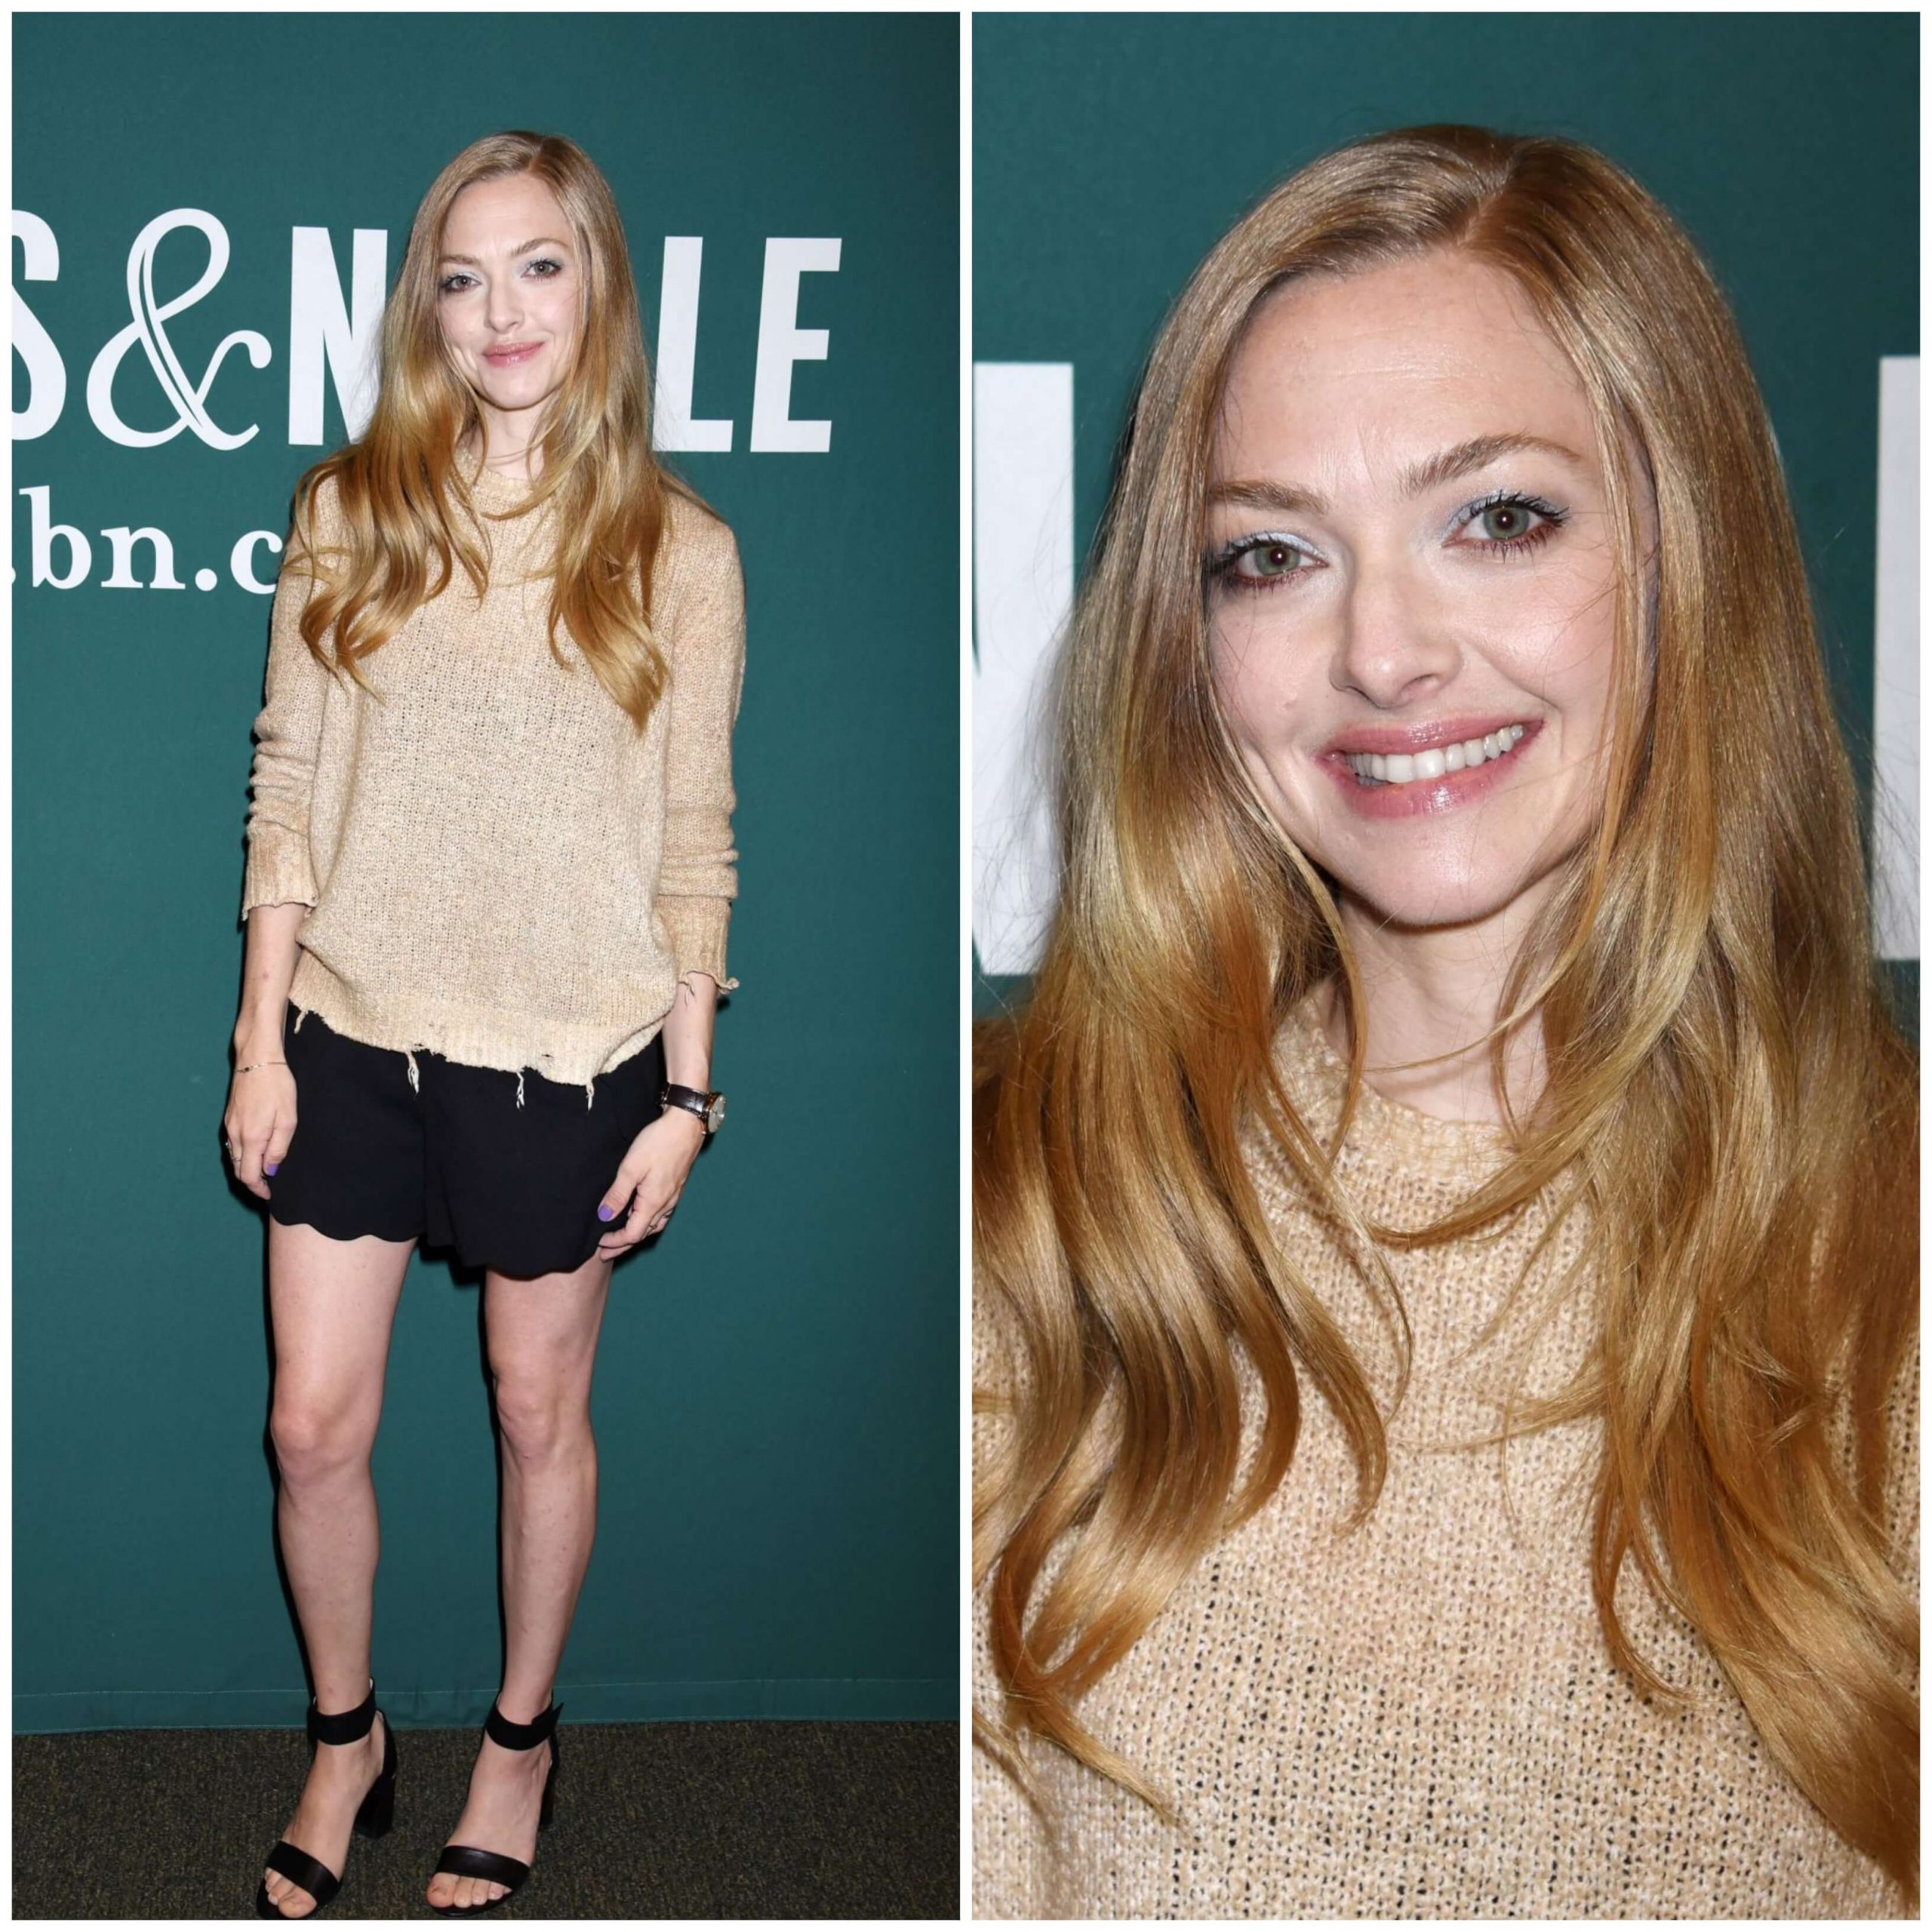 Amanda Seyfried In Full Sleeves Top With Black Shorts At “The Art of Racing in the Rain” Book Signing in Los Angeles